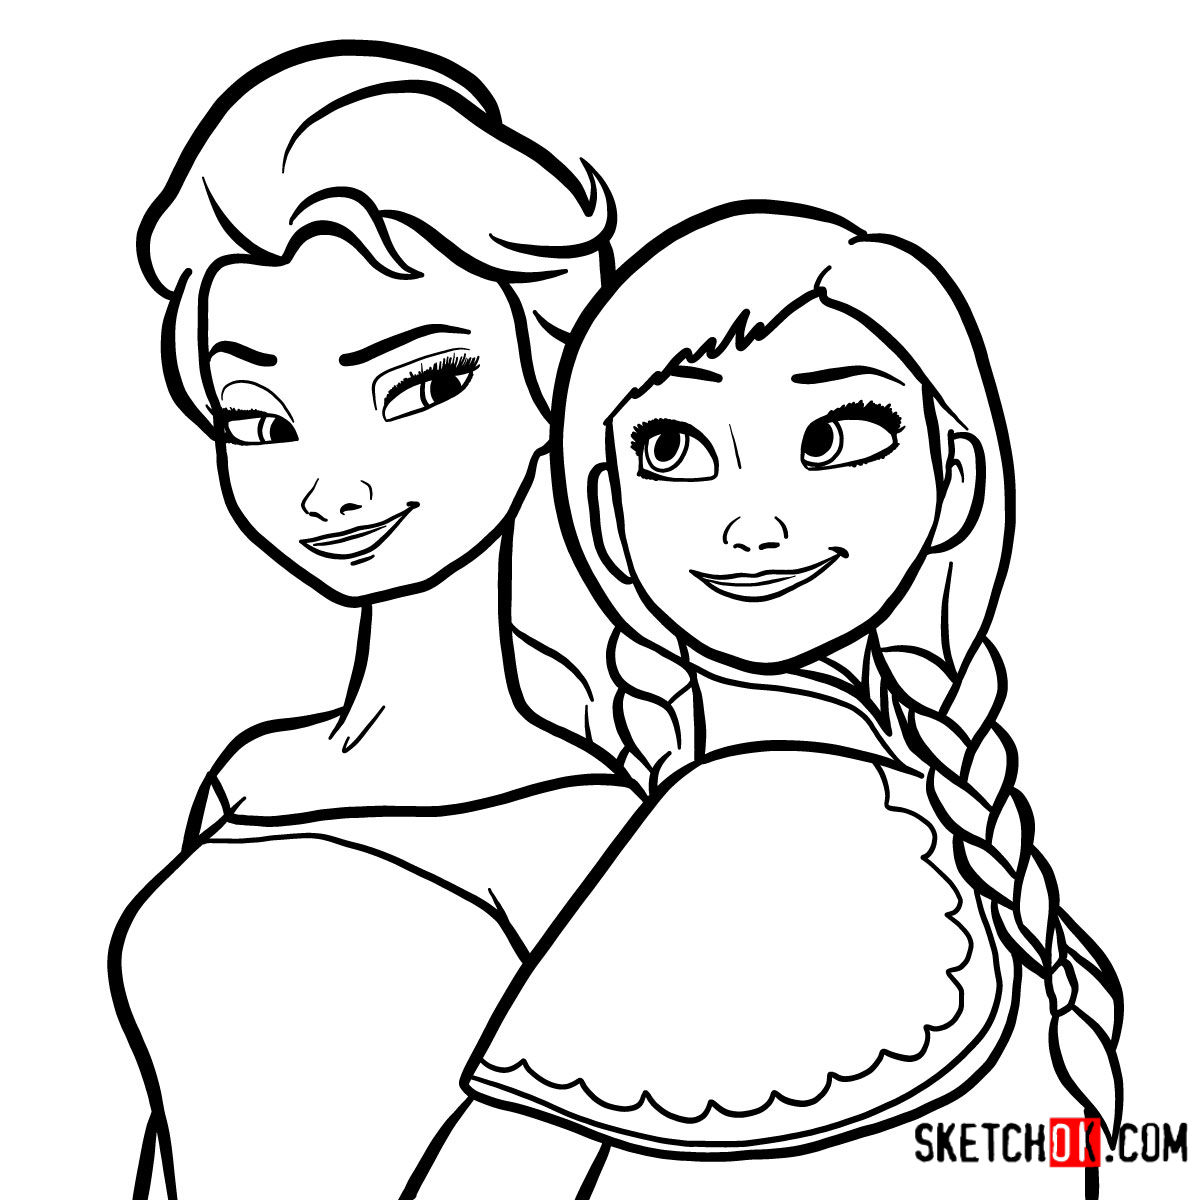 How to draw Elsa and Anna together Frozen Sketchok